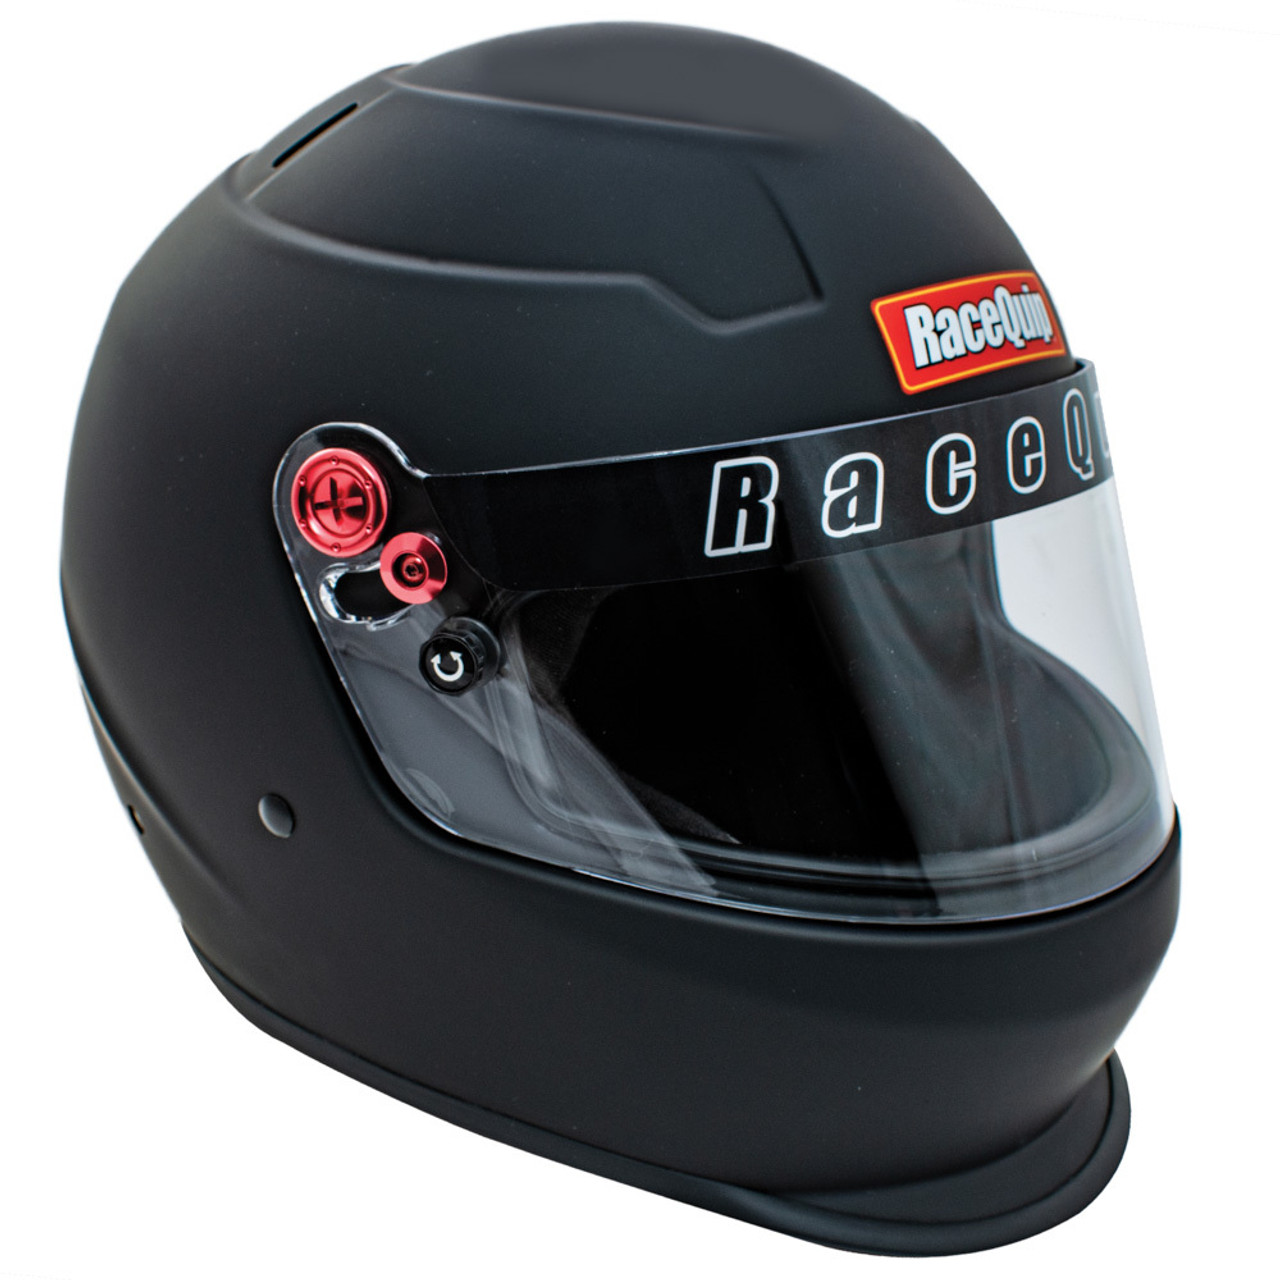 RQP276992, Helmet, Pro20, Full Face, Snell SA 2020, Head and Neck Support Ready, Flat Black, Small, Each